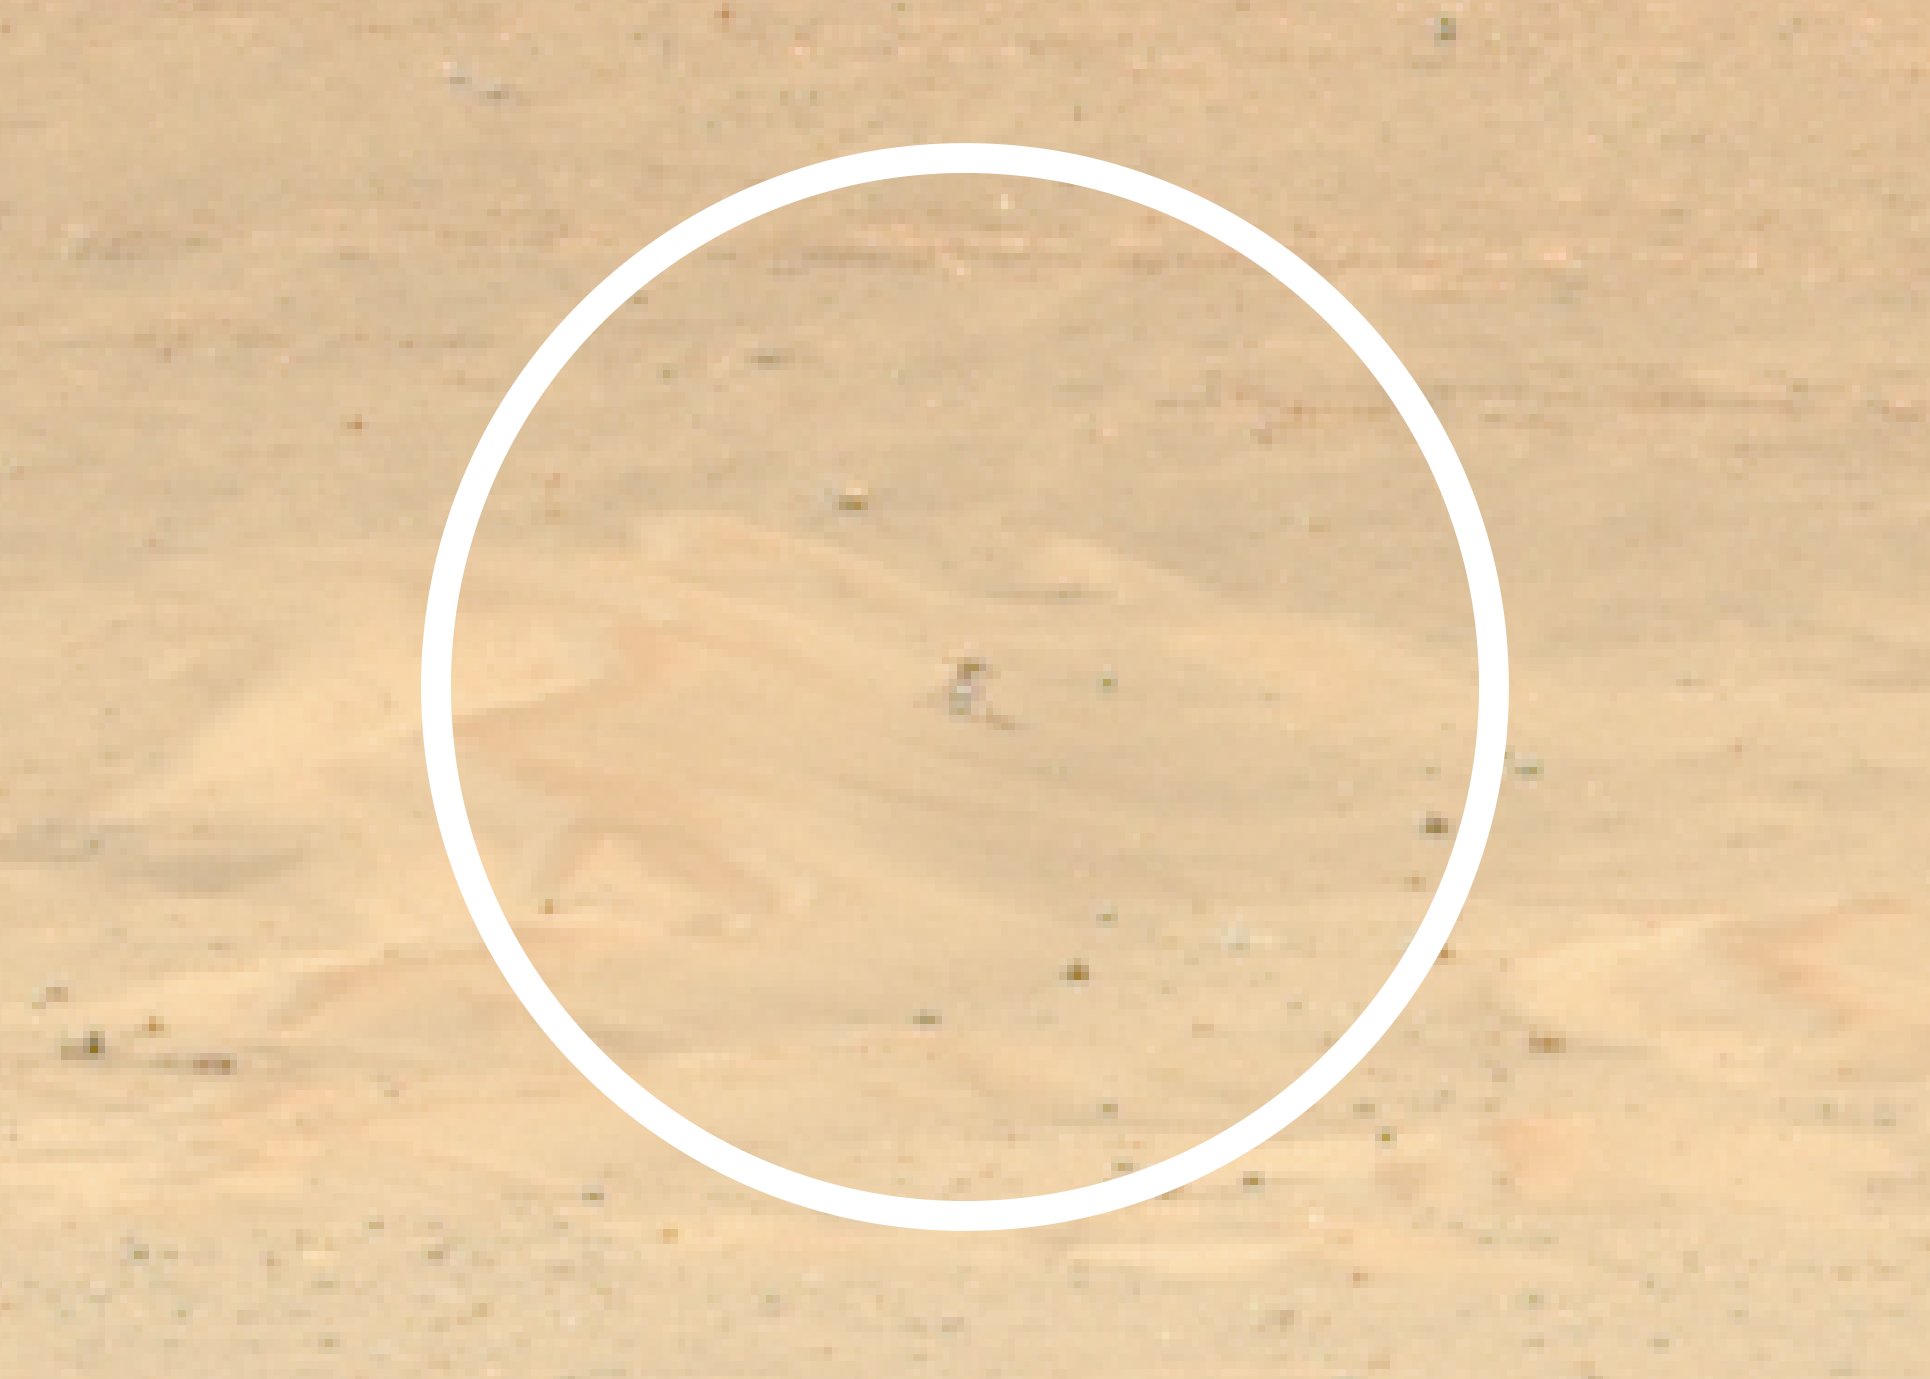 Enlarged view of a photo of NASA's Ingenuity Mars helicopter taken by the agency's Perseverance rover.  The rover team posted this image on Twitter on January 11, 2023.